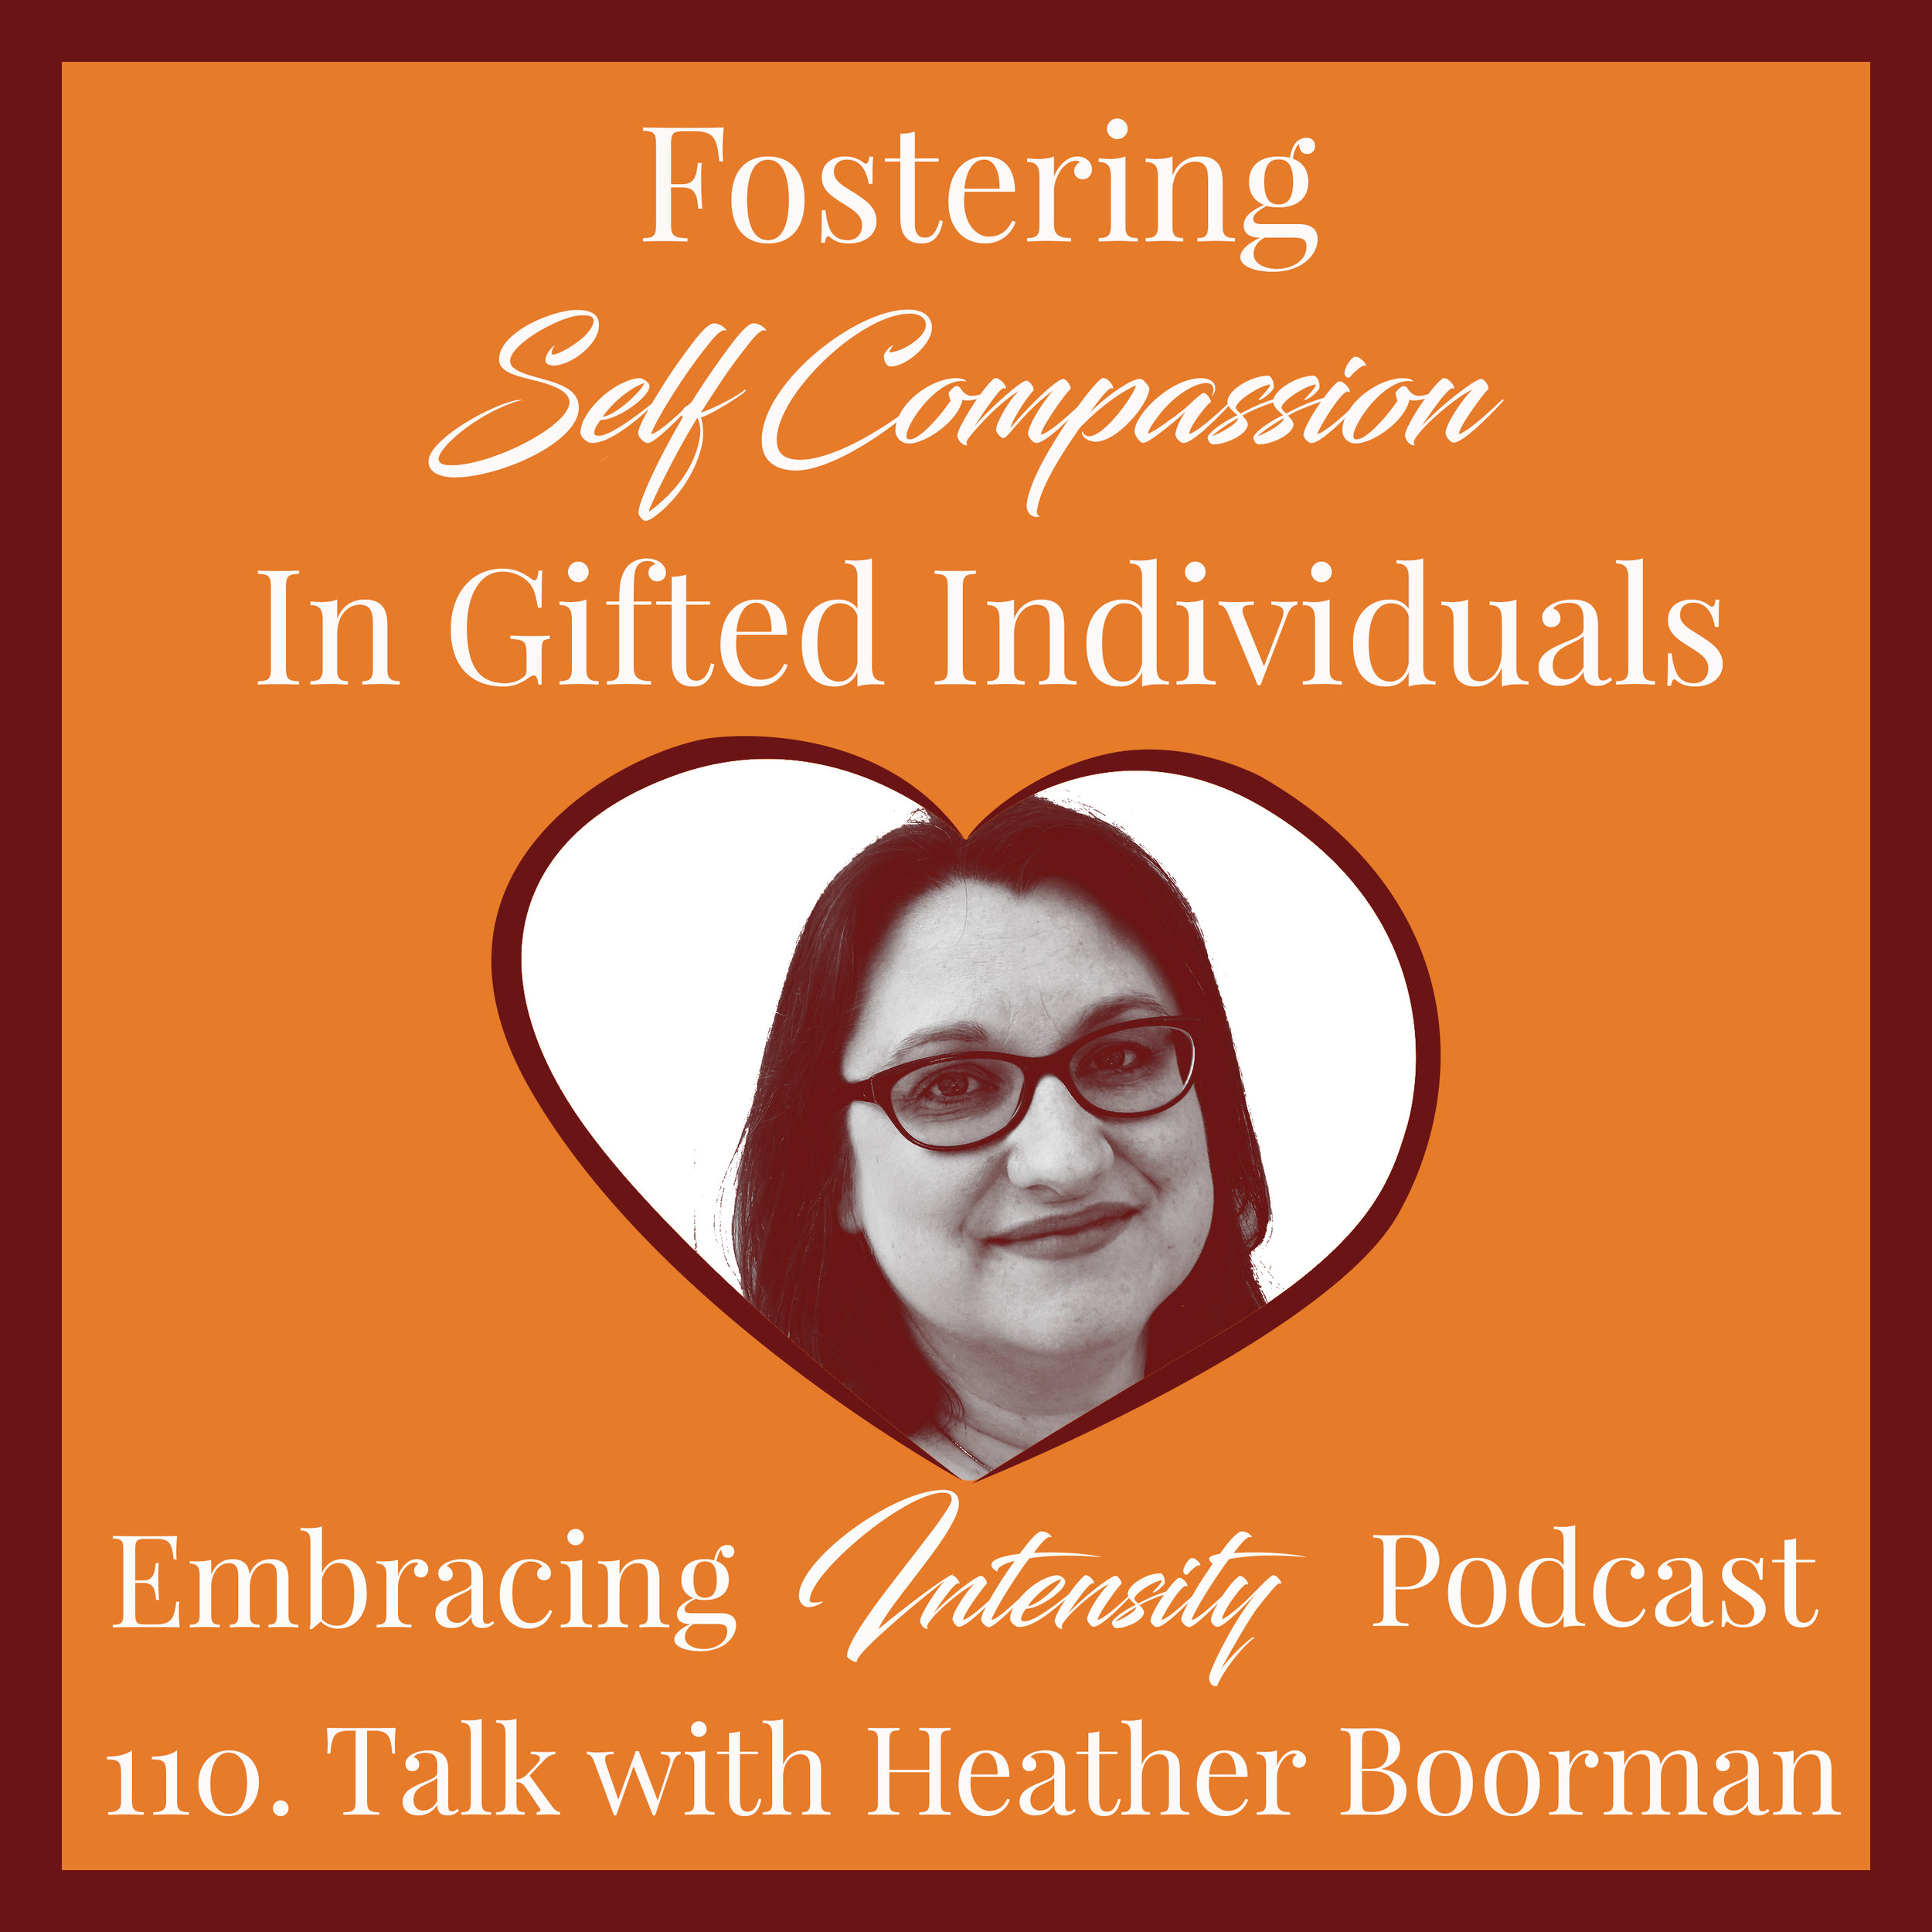 Fostering Self Compassion in Gifted Individuals